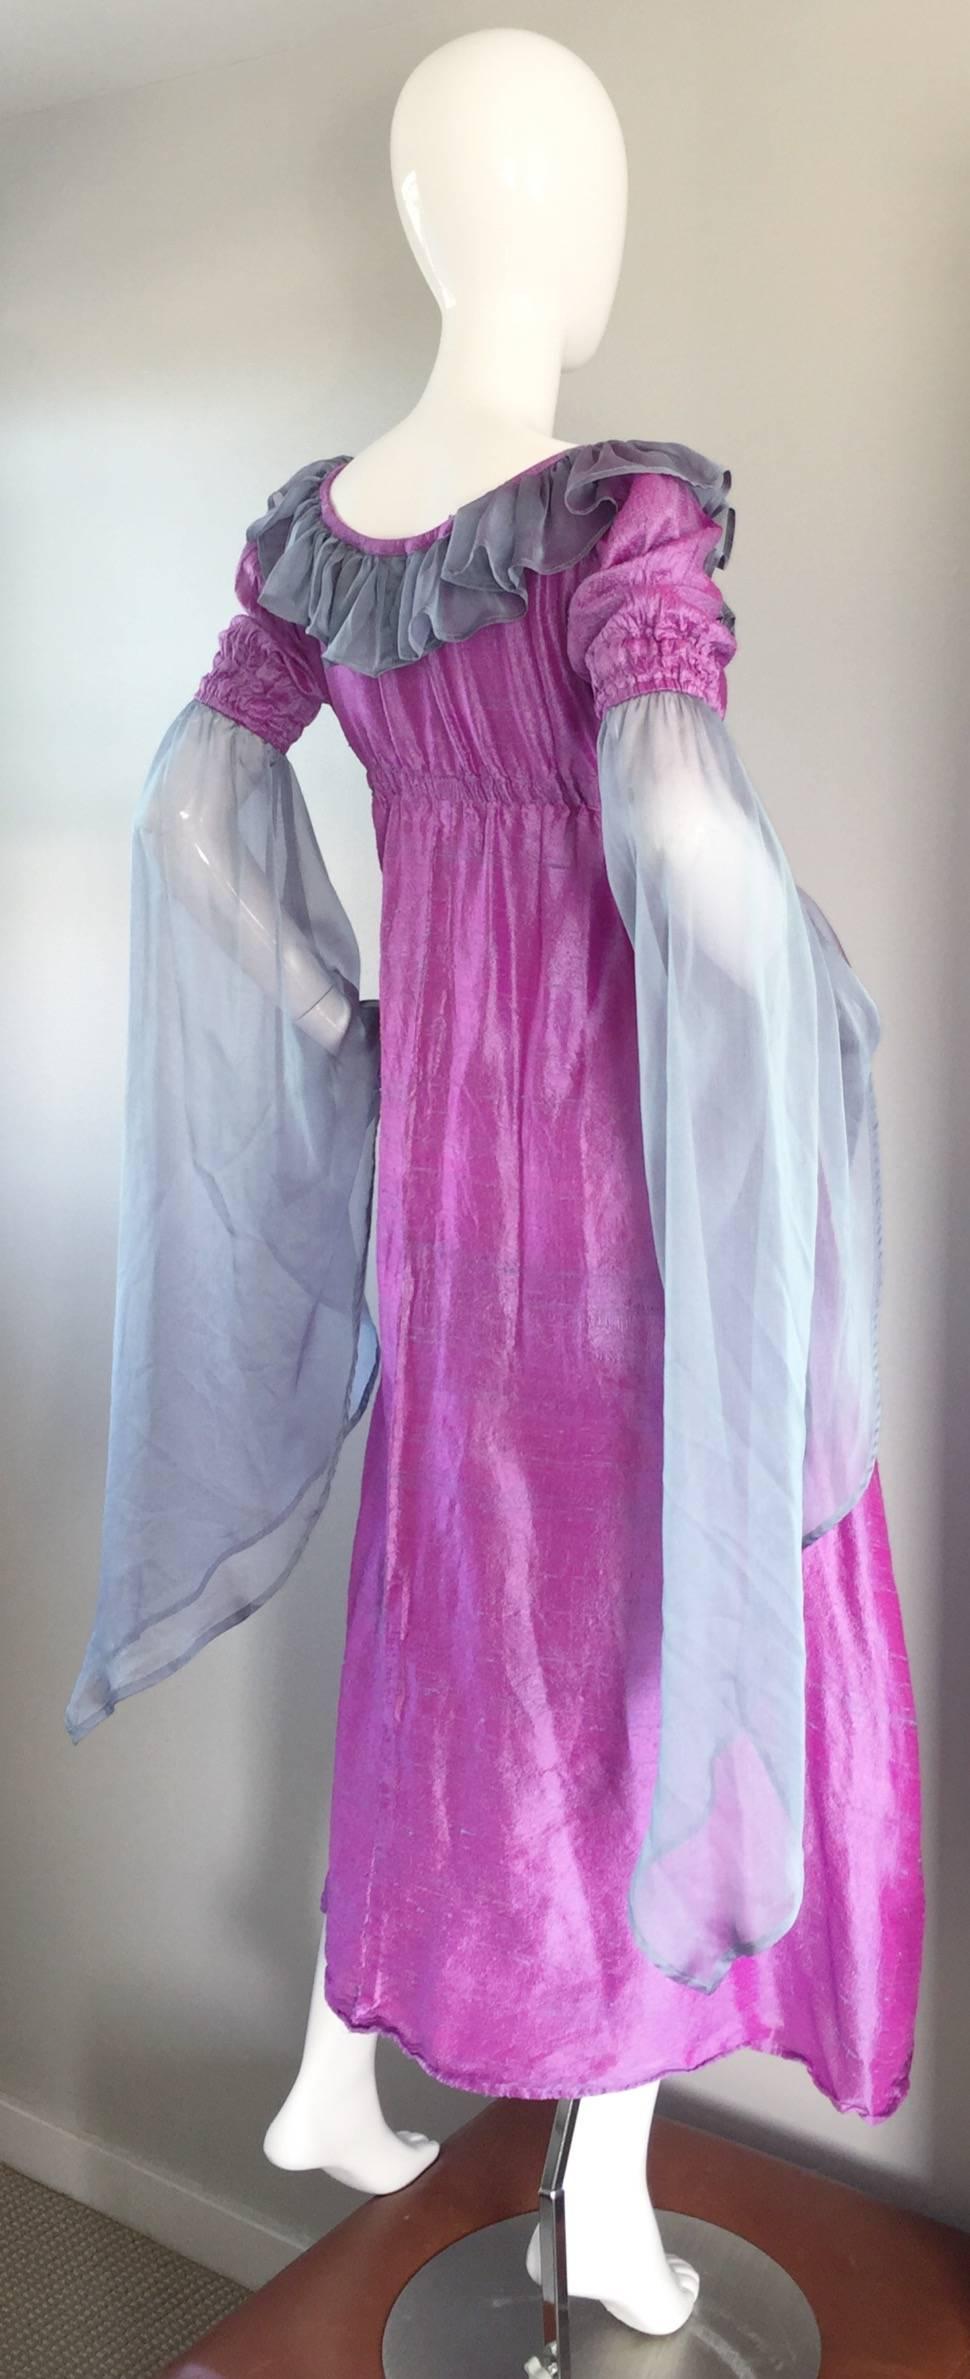 Beautiful 1970s raw silk + chiffon dress! Vibrant fuchsia color, with purple gray chiffon angel sleeves. Flattering empire waist on this maxi dress. Elastic at waist, and at sleeve cuffs (can also be worn off the shoulder). Perfect from day to